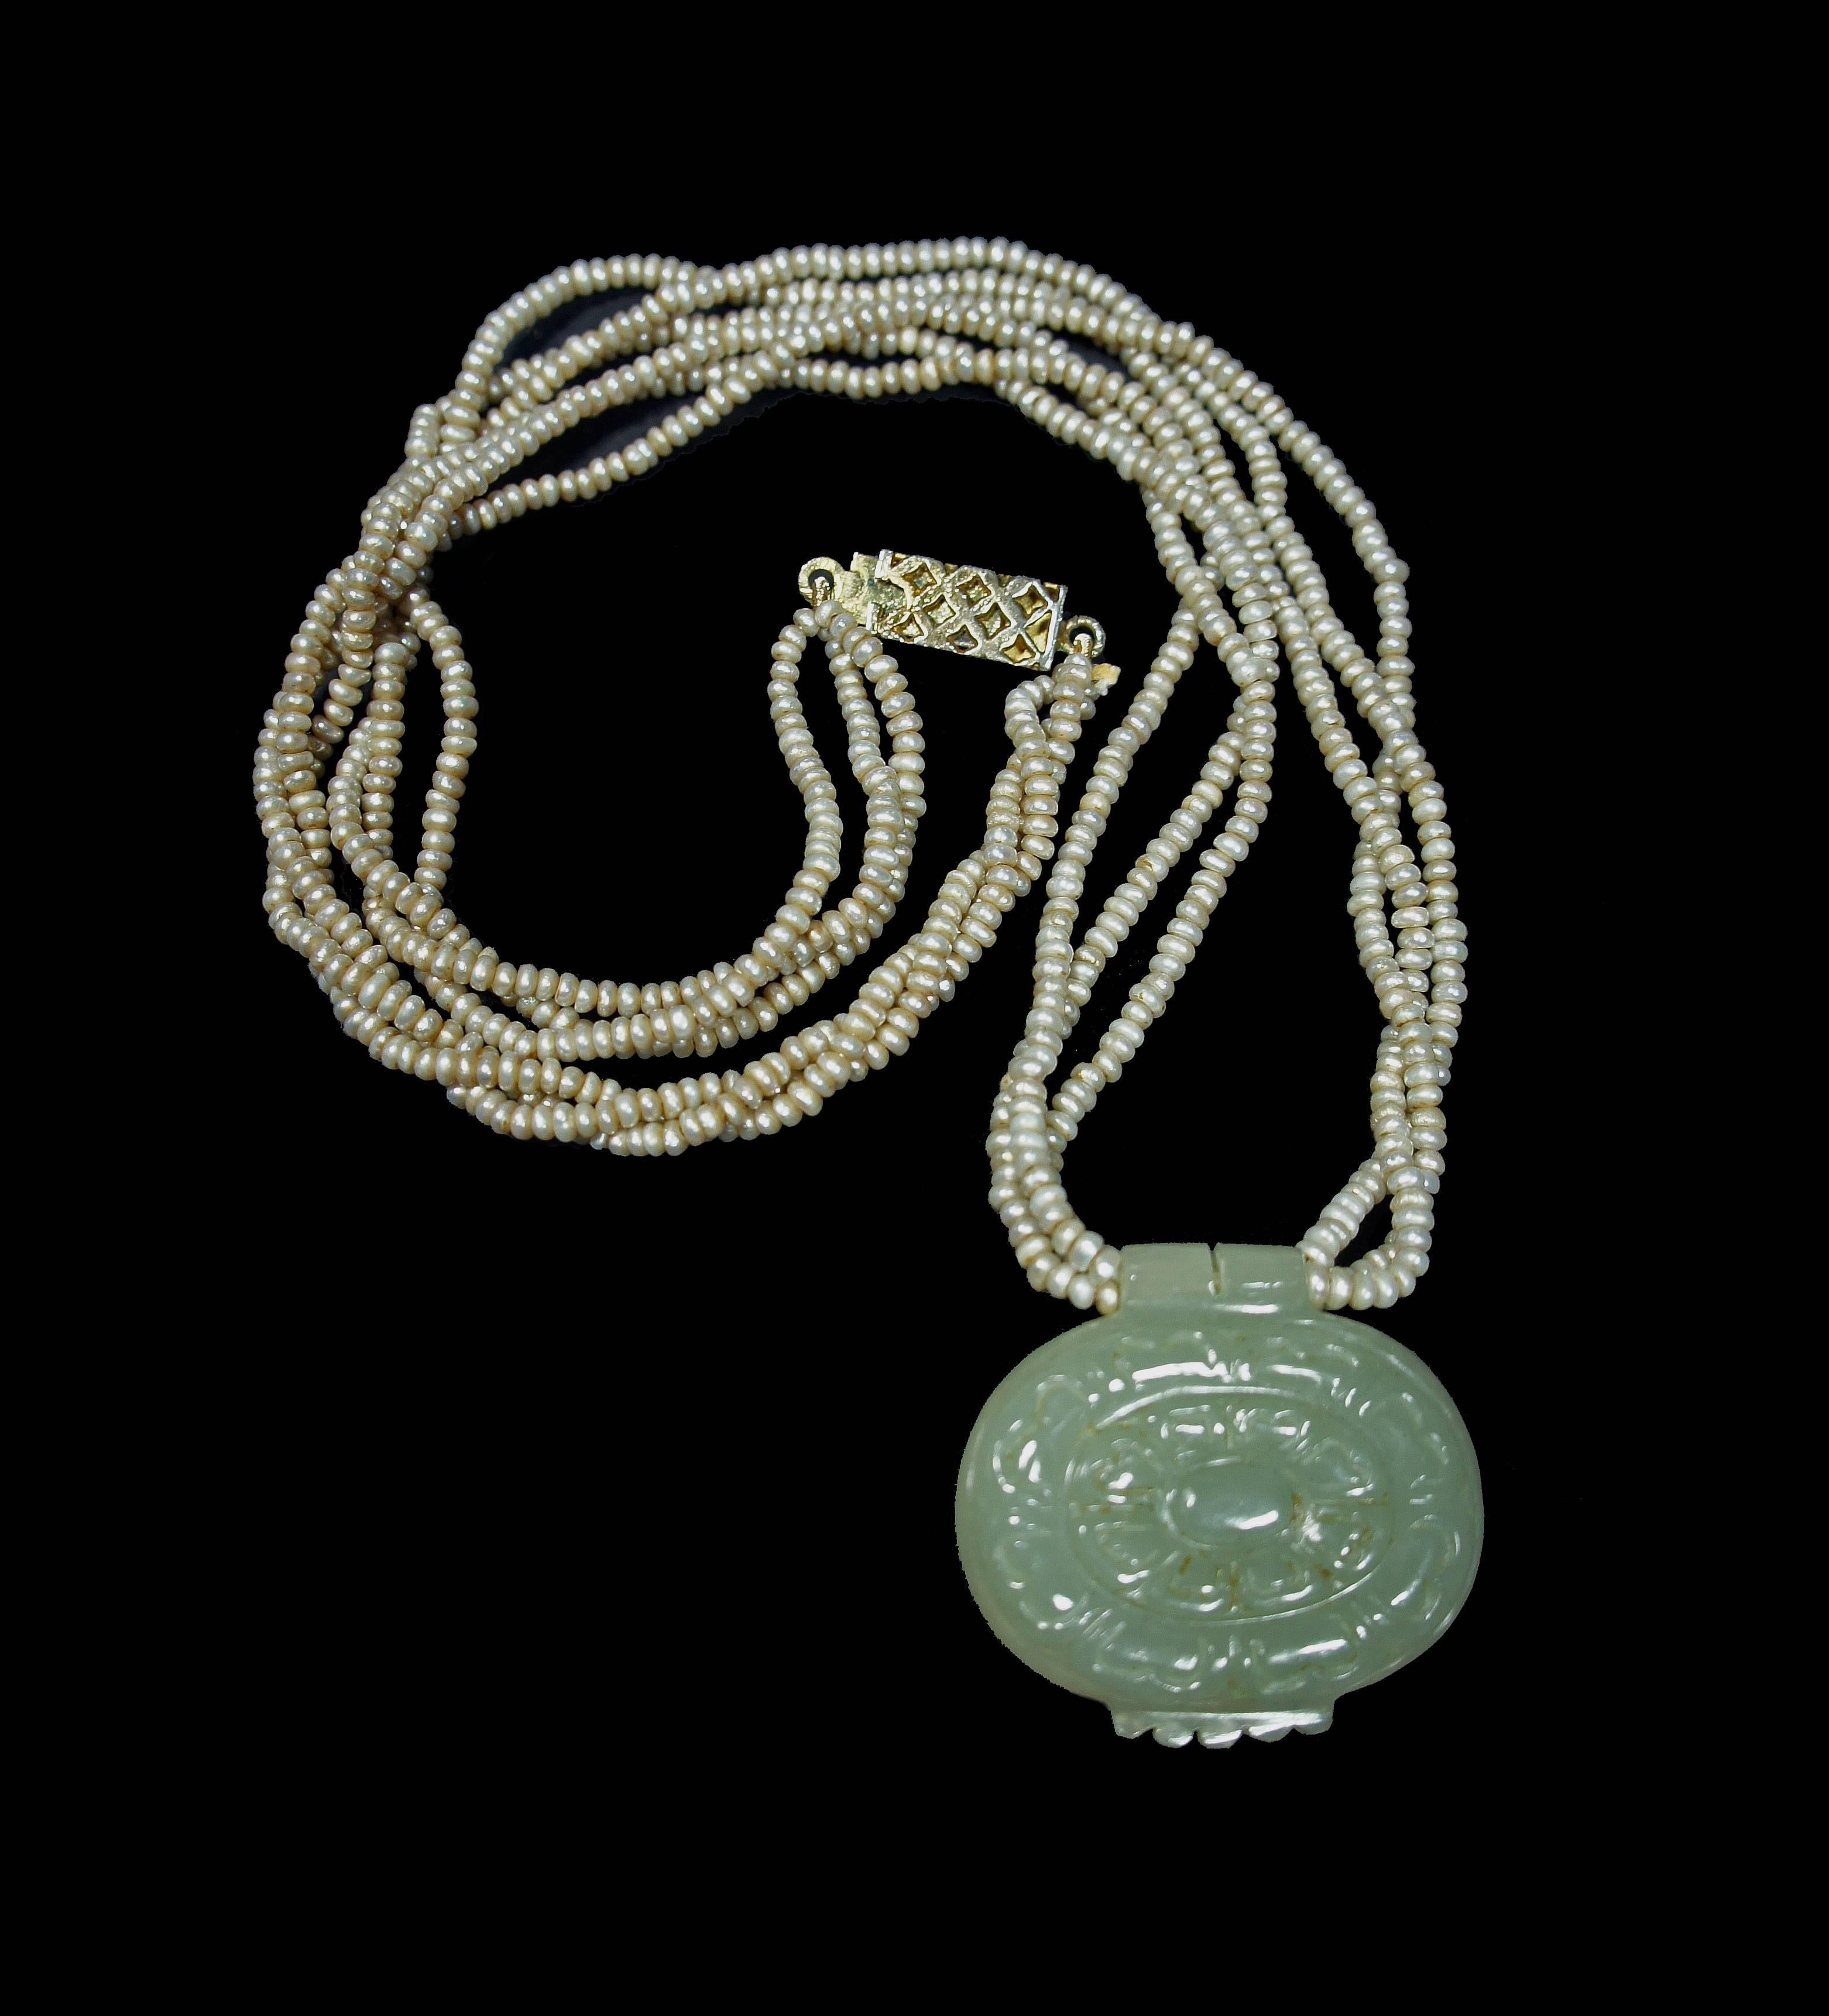 Late 19th-early 20th century Mughal style Khotan light green jade earrings inlaid with diamonds and secured by 22-karat gold outline in kundan technique converted into pendant and strung with new Basara pearls necklace.